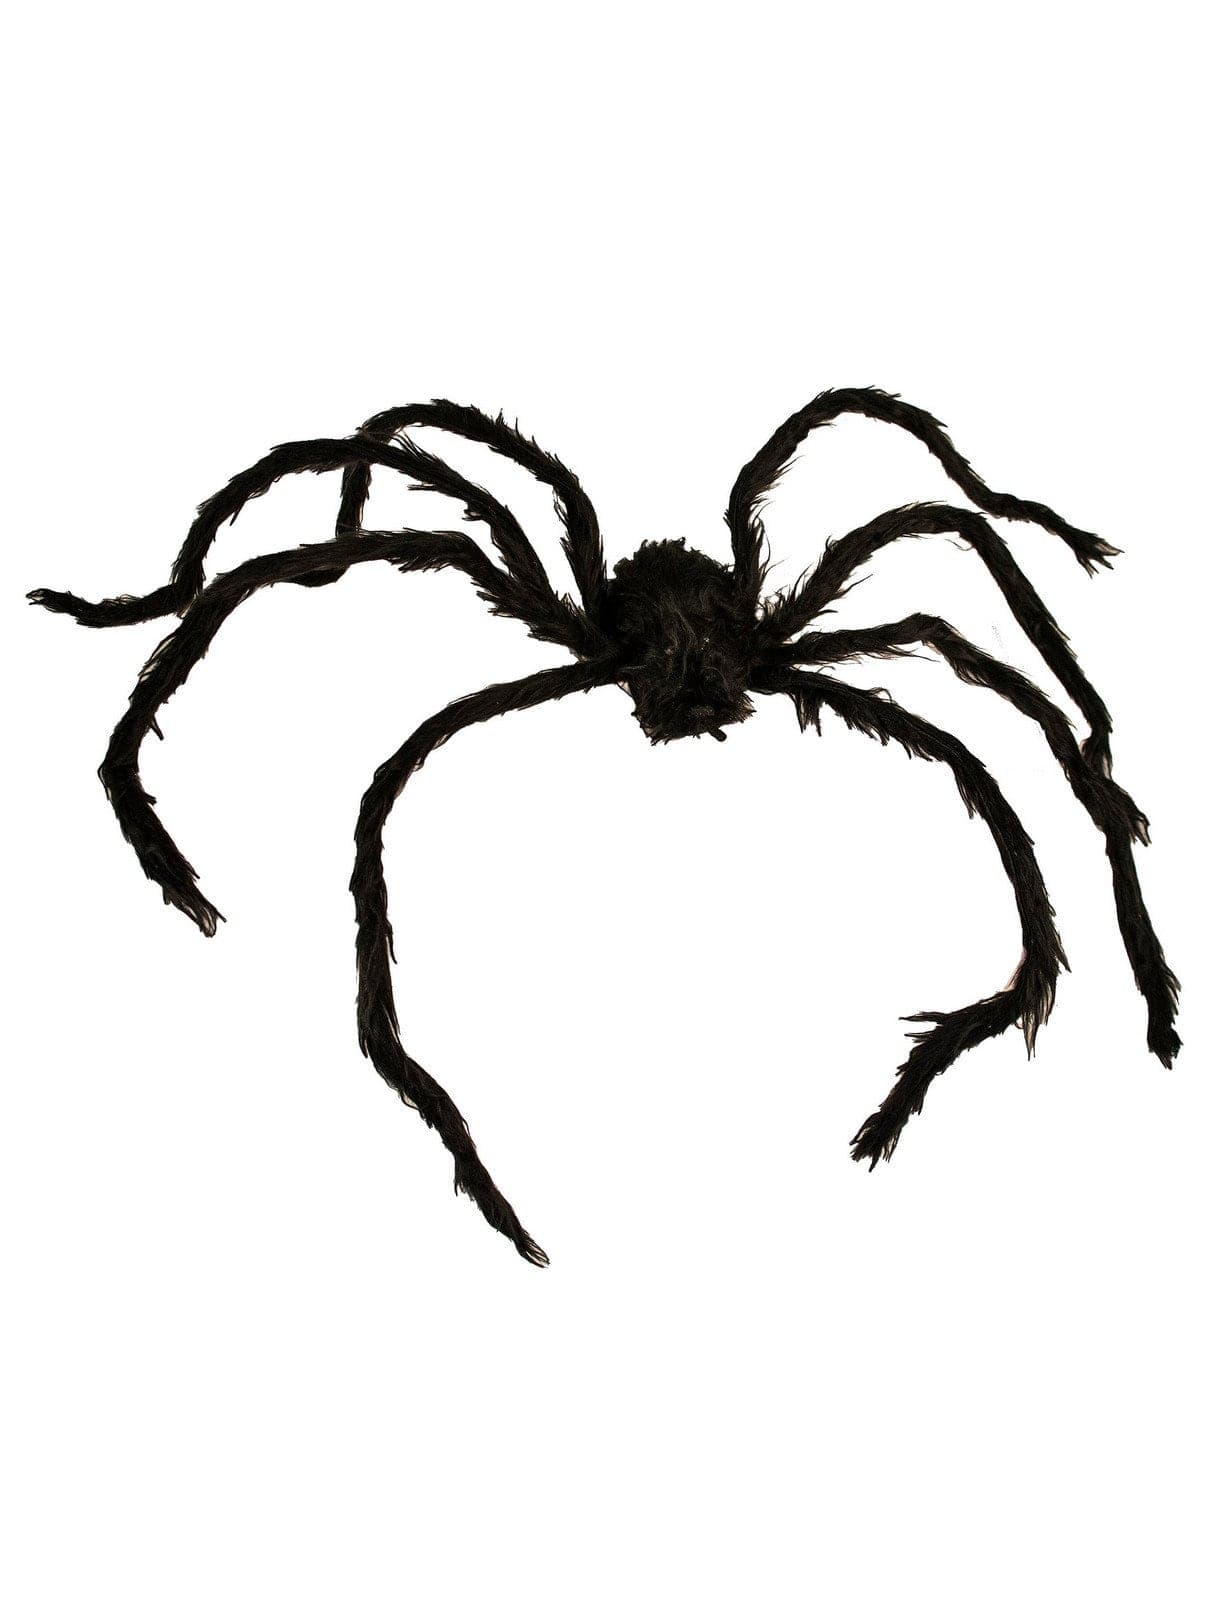 3.5 Ft Posable Spider - costumes.com